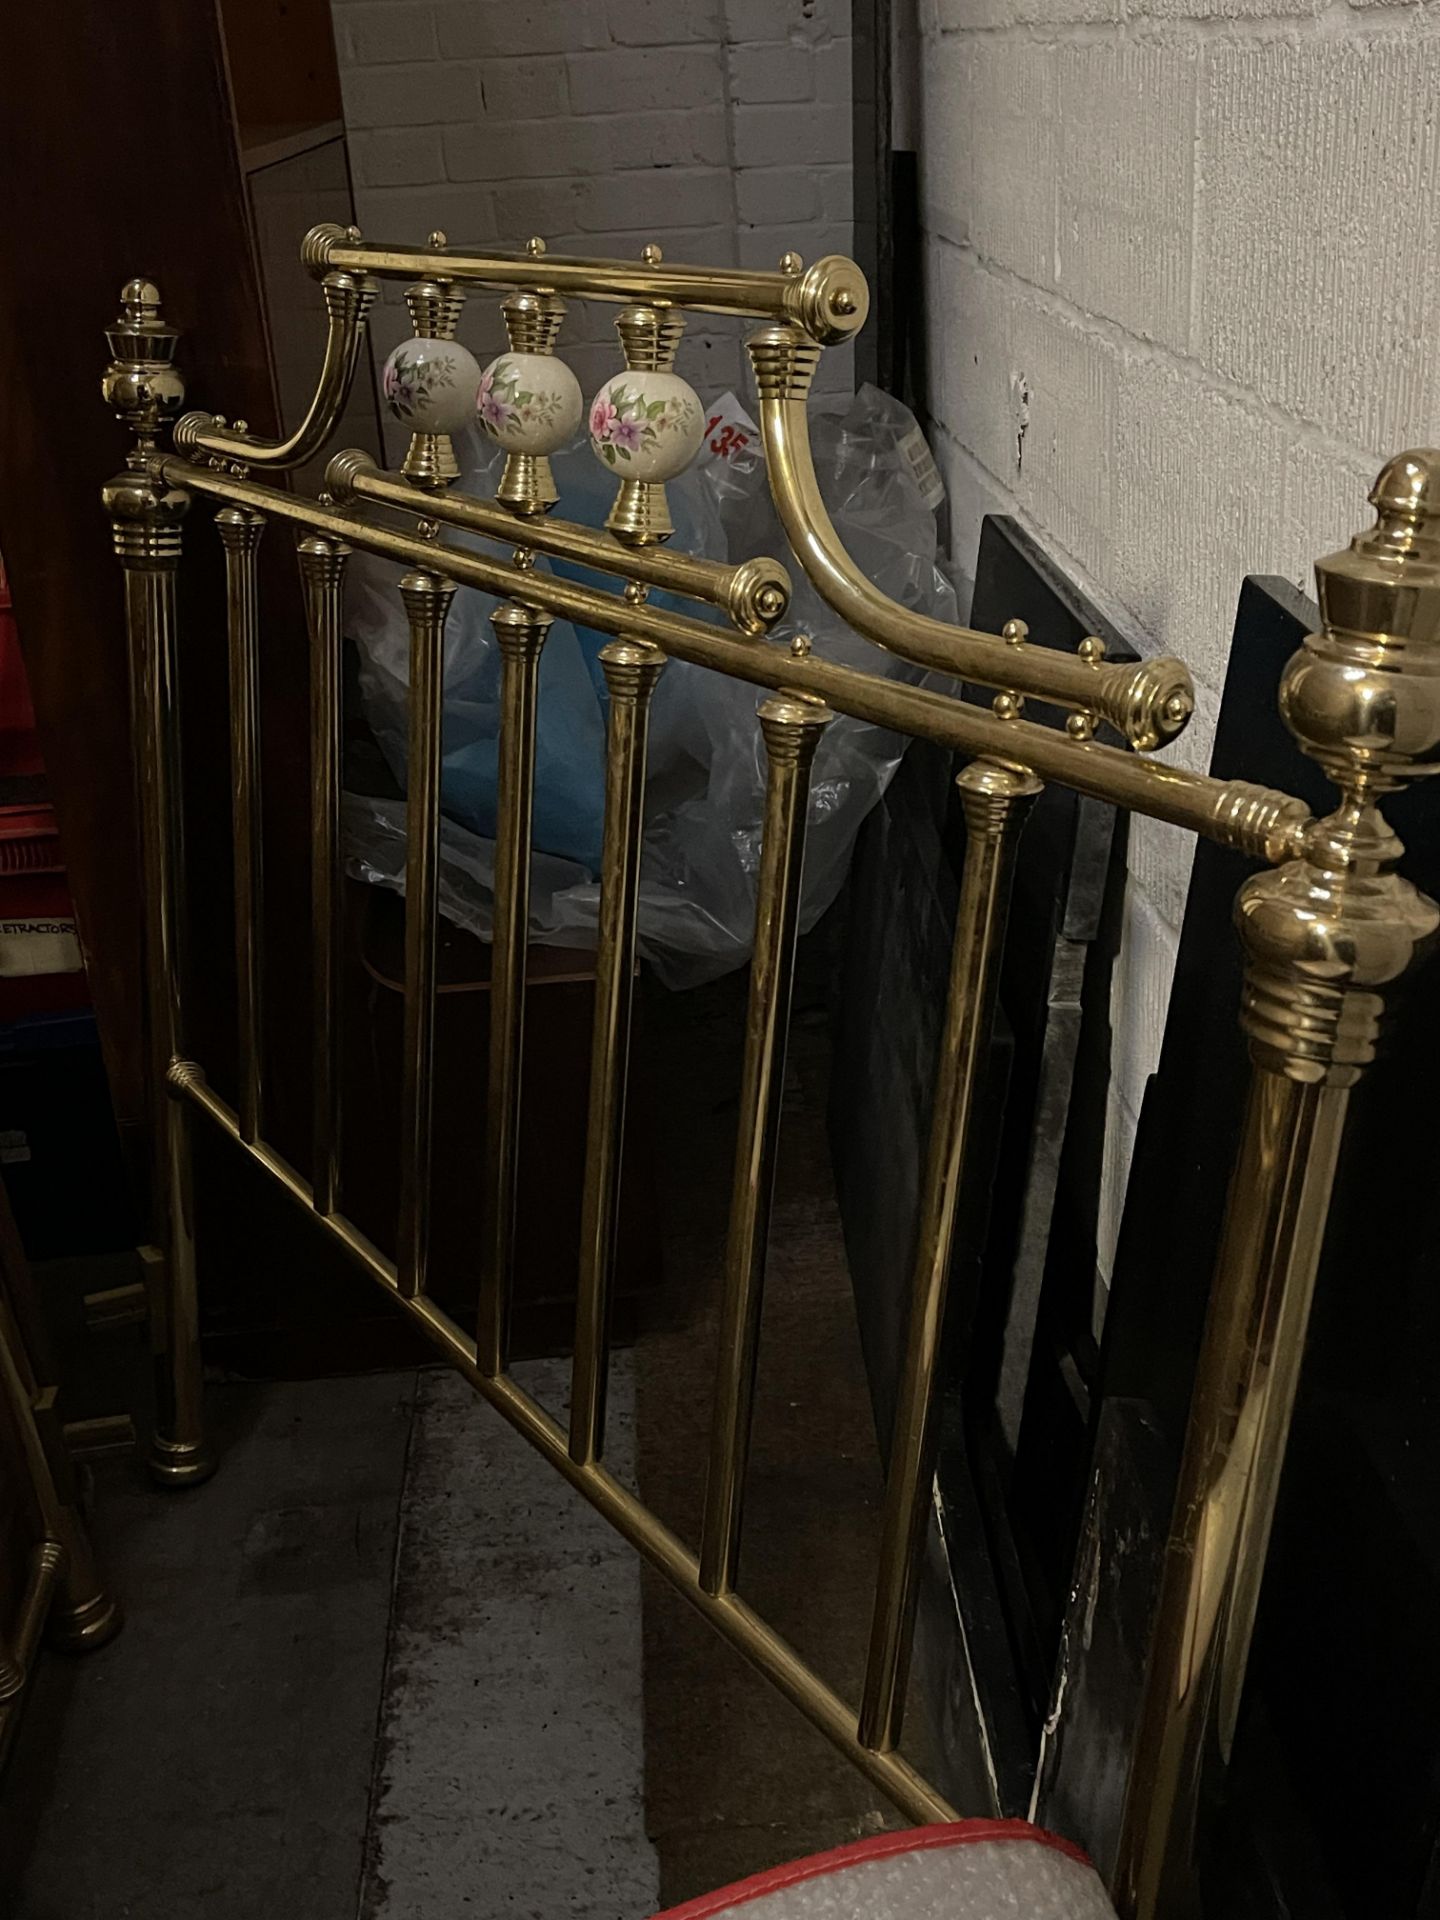 Brass double bed frame very old unclaimed property - Image 4 of 8